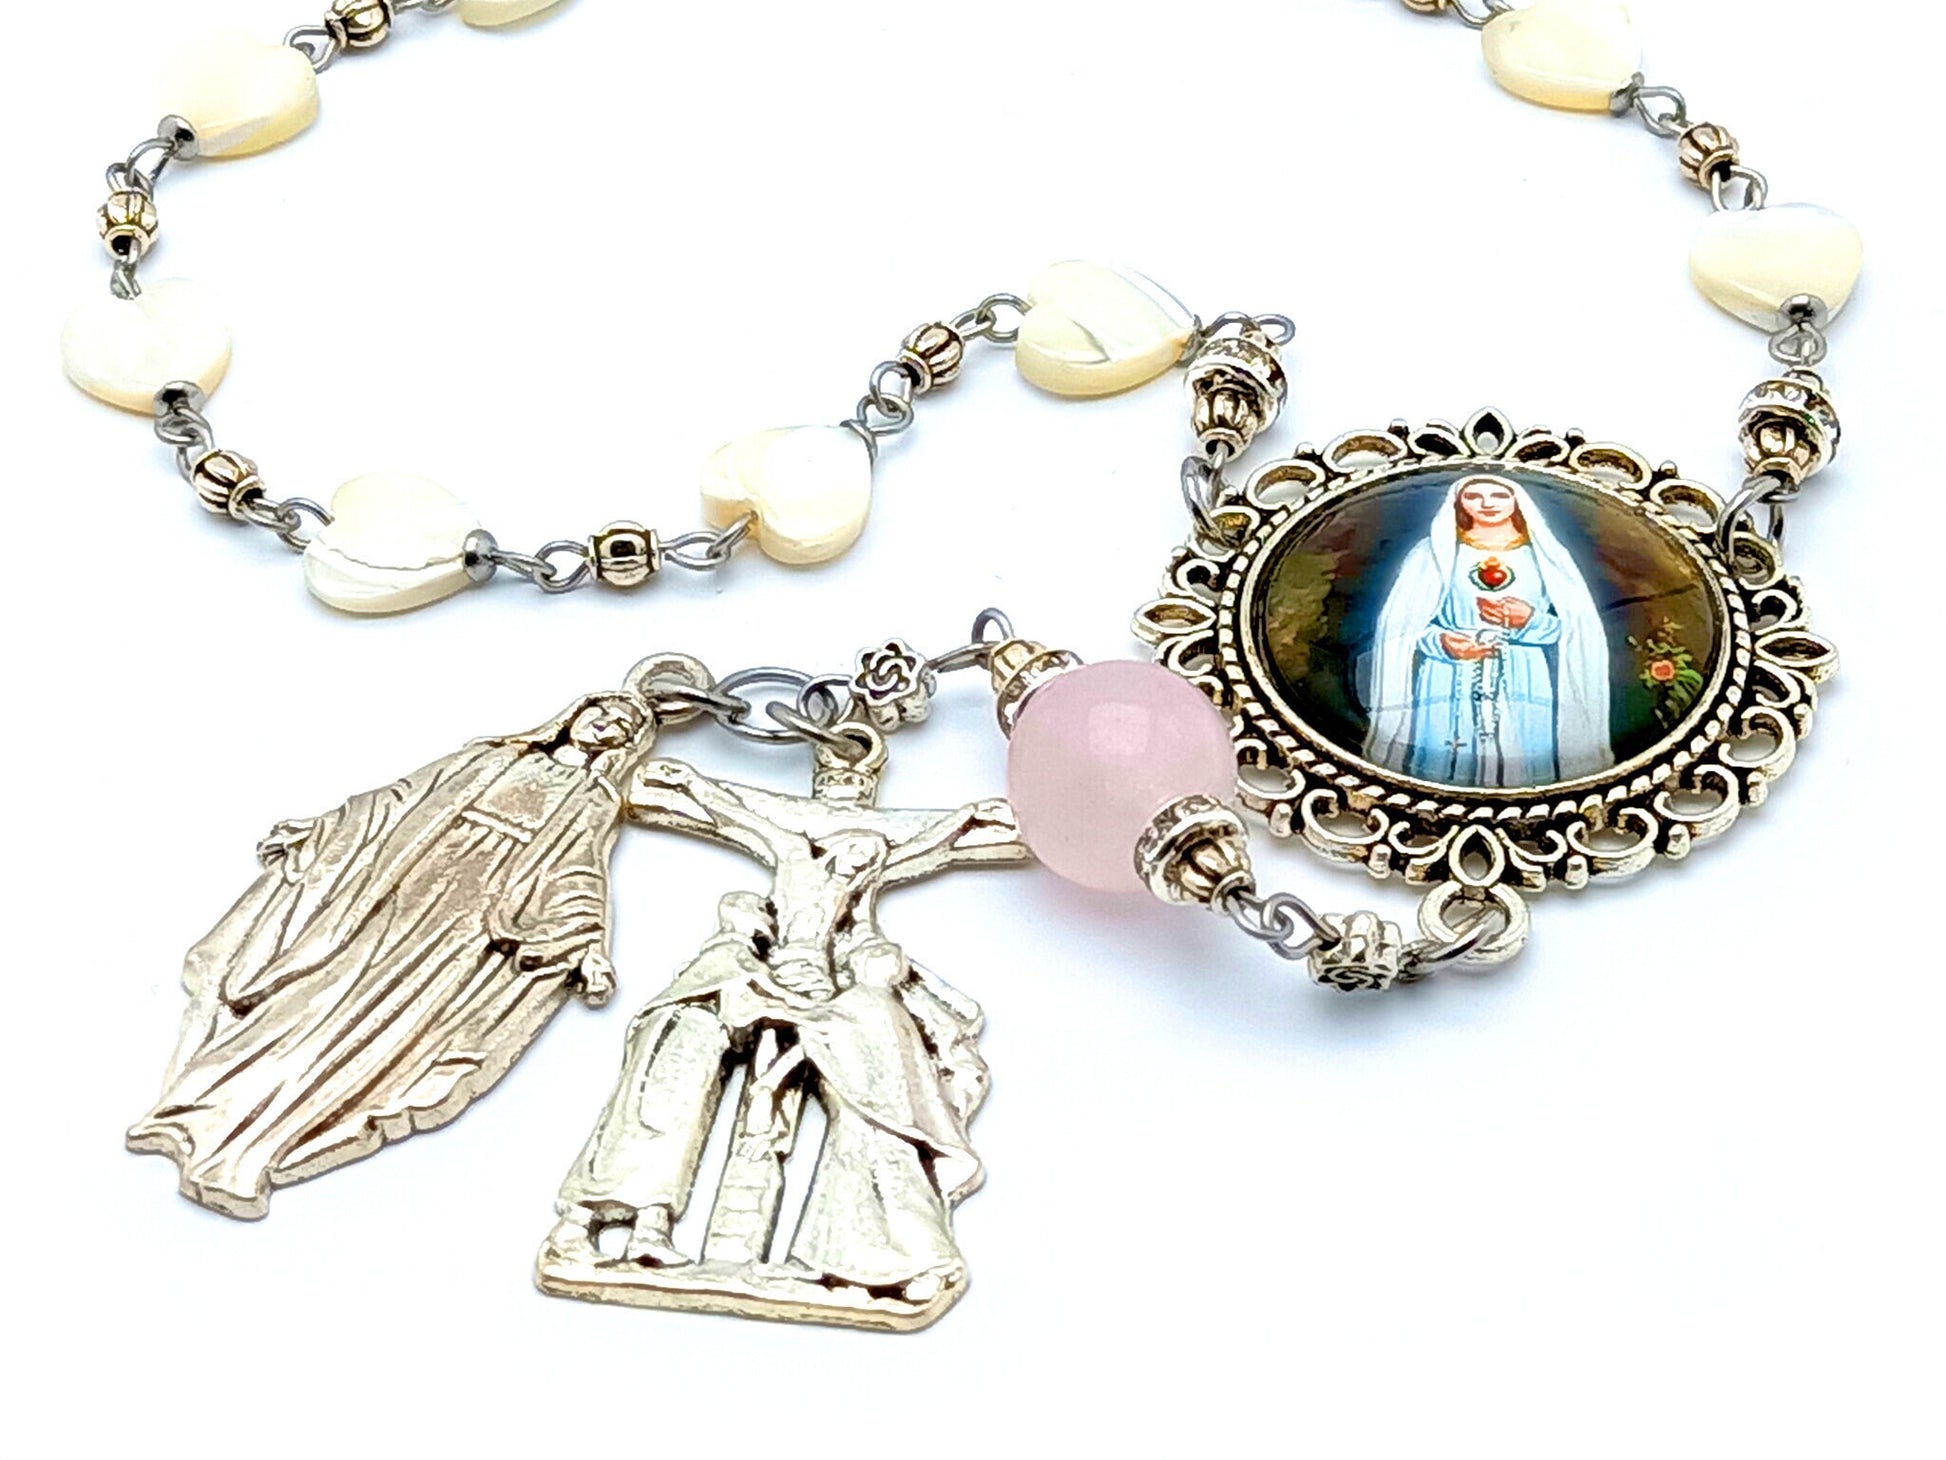 Immaculate Heart of Mary unique rosary beads single decade rosary beads with mother of pearl and pink glass beads, La Pieta crucifix and picture centre medal.